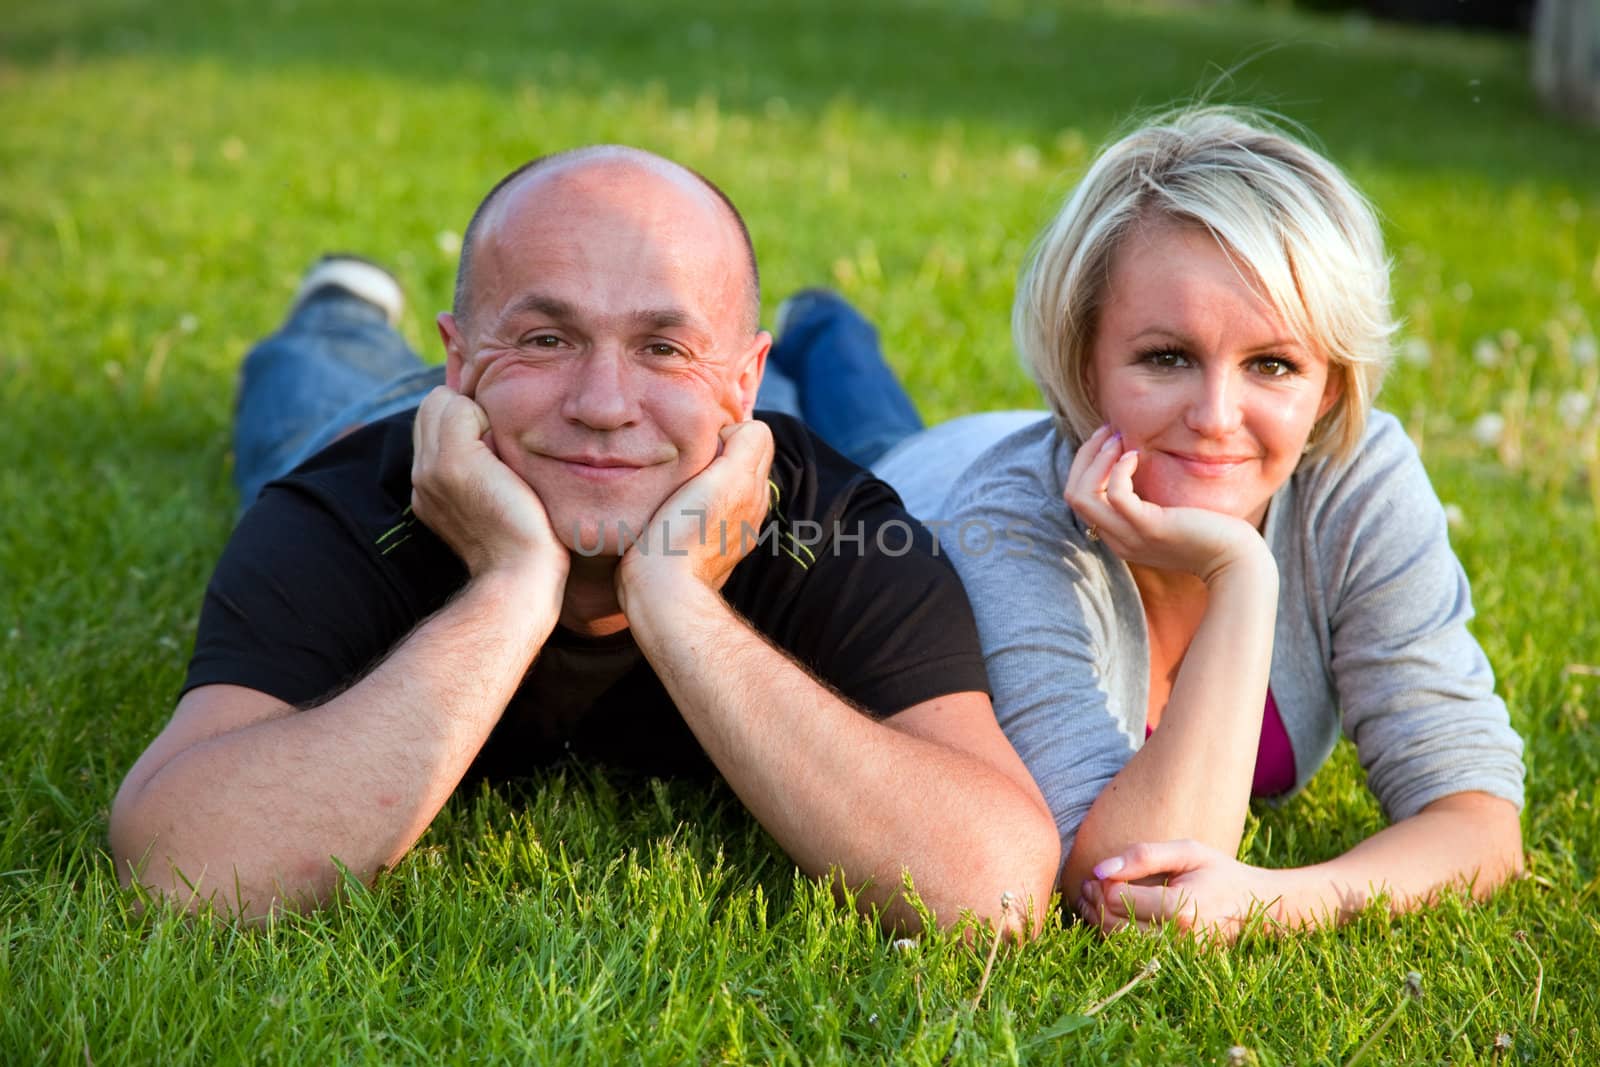 Adult happy couple together lying on grass